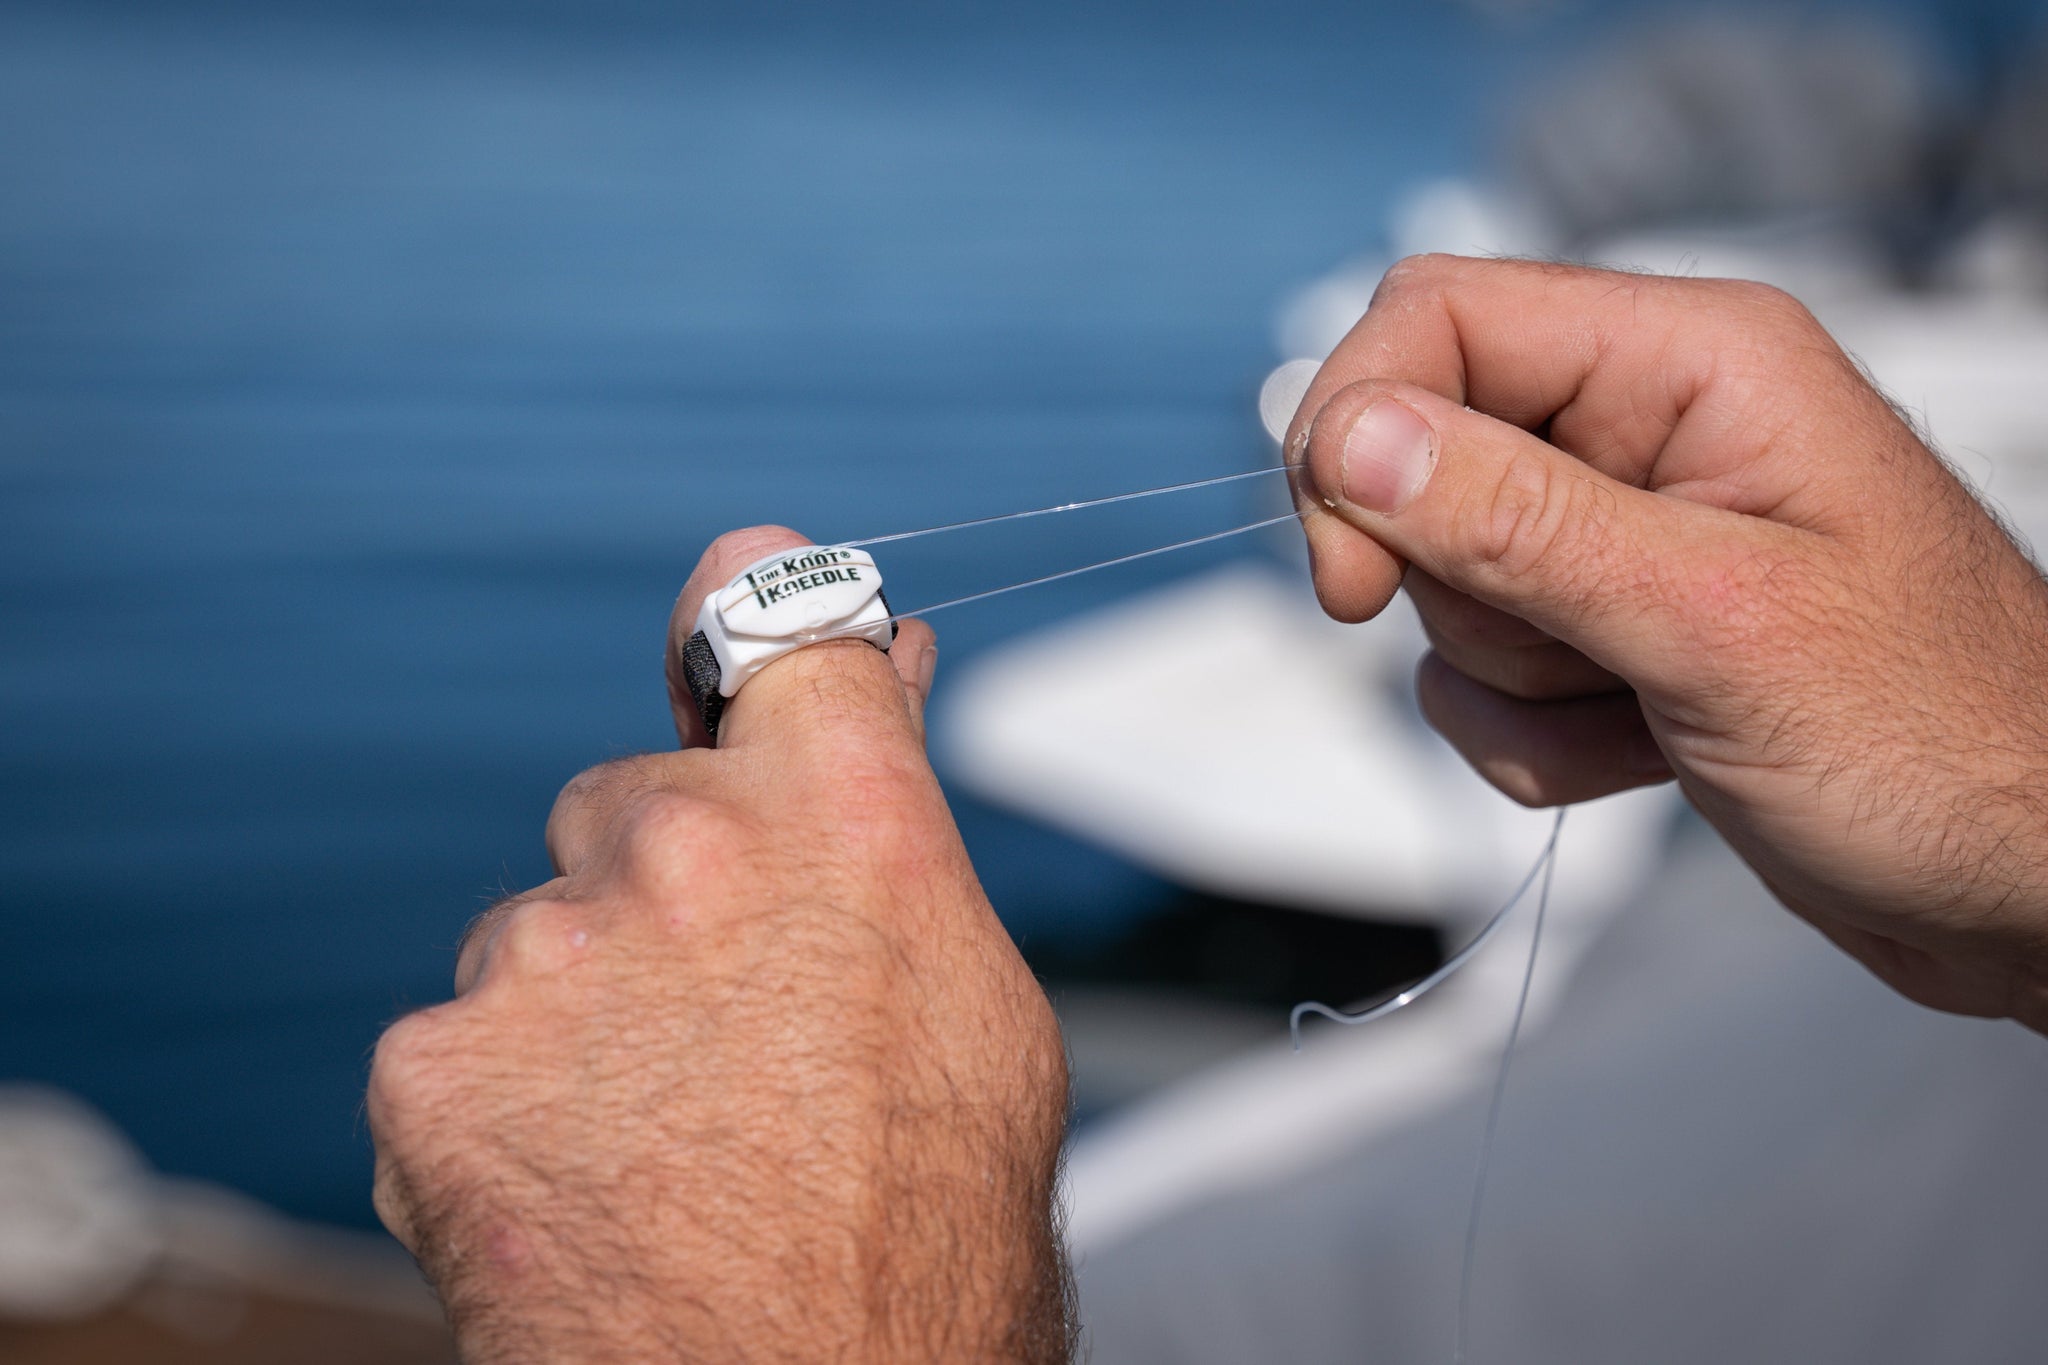 Line Cutterz Ring (as seen on shark tank) – The Knot Kneedle